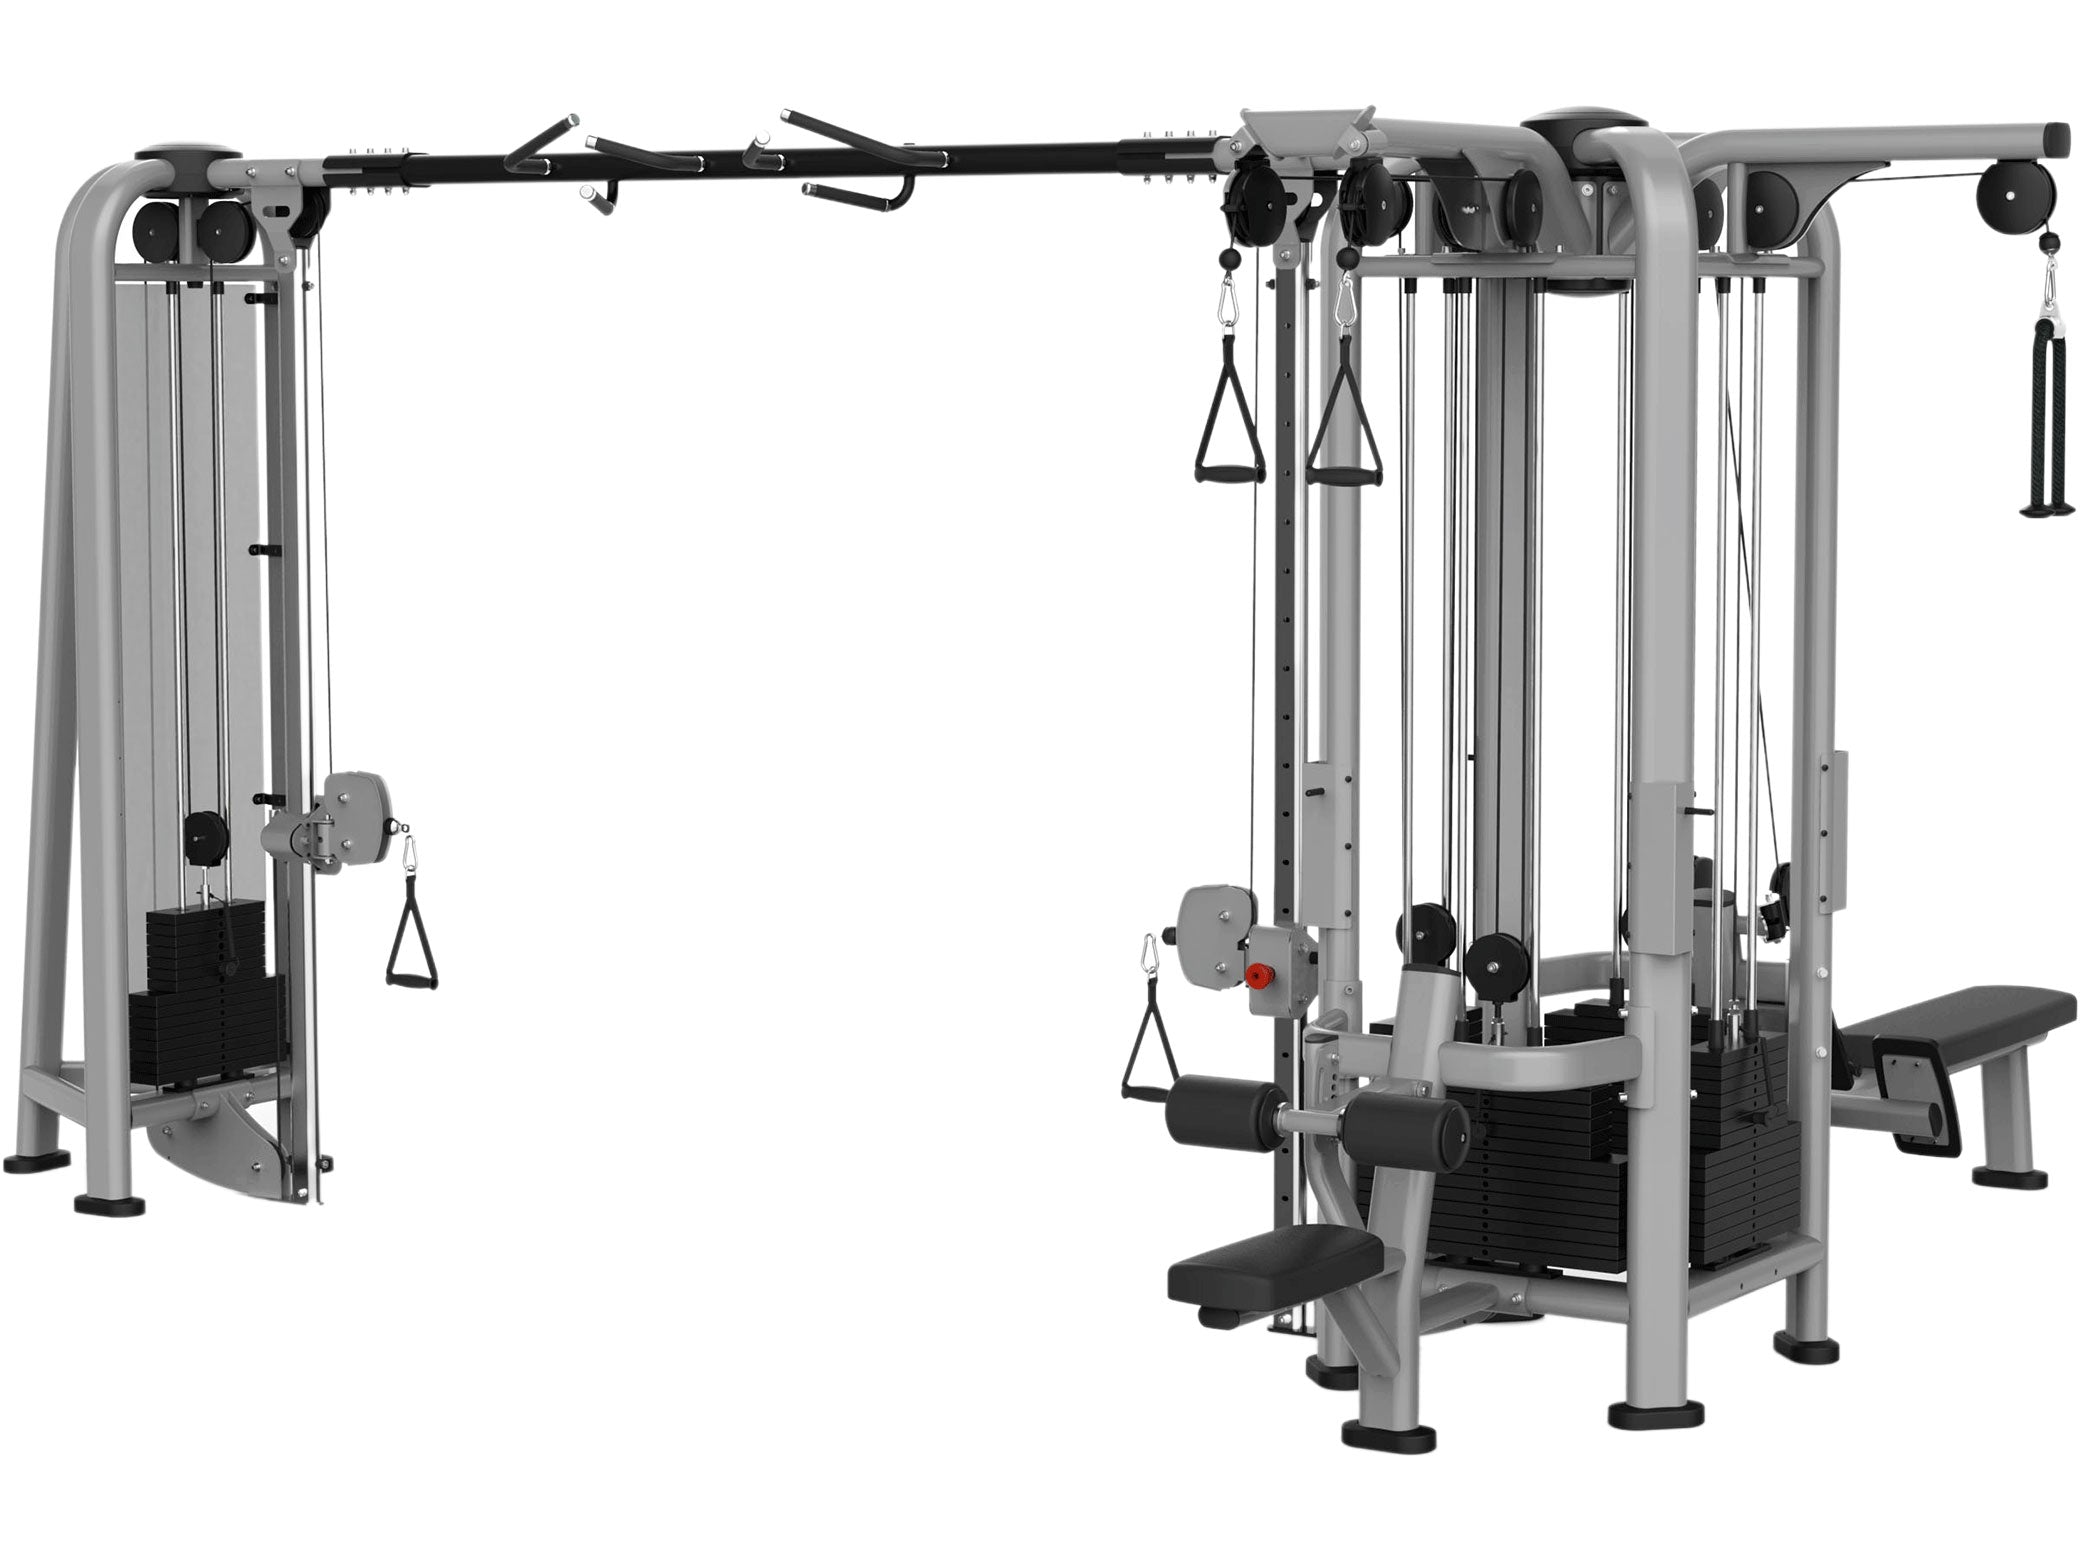 Sportgear 5 stack Multi Station with Dual Pulley Pulldown and Row